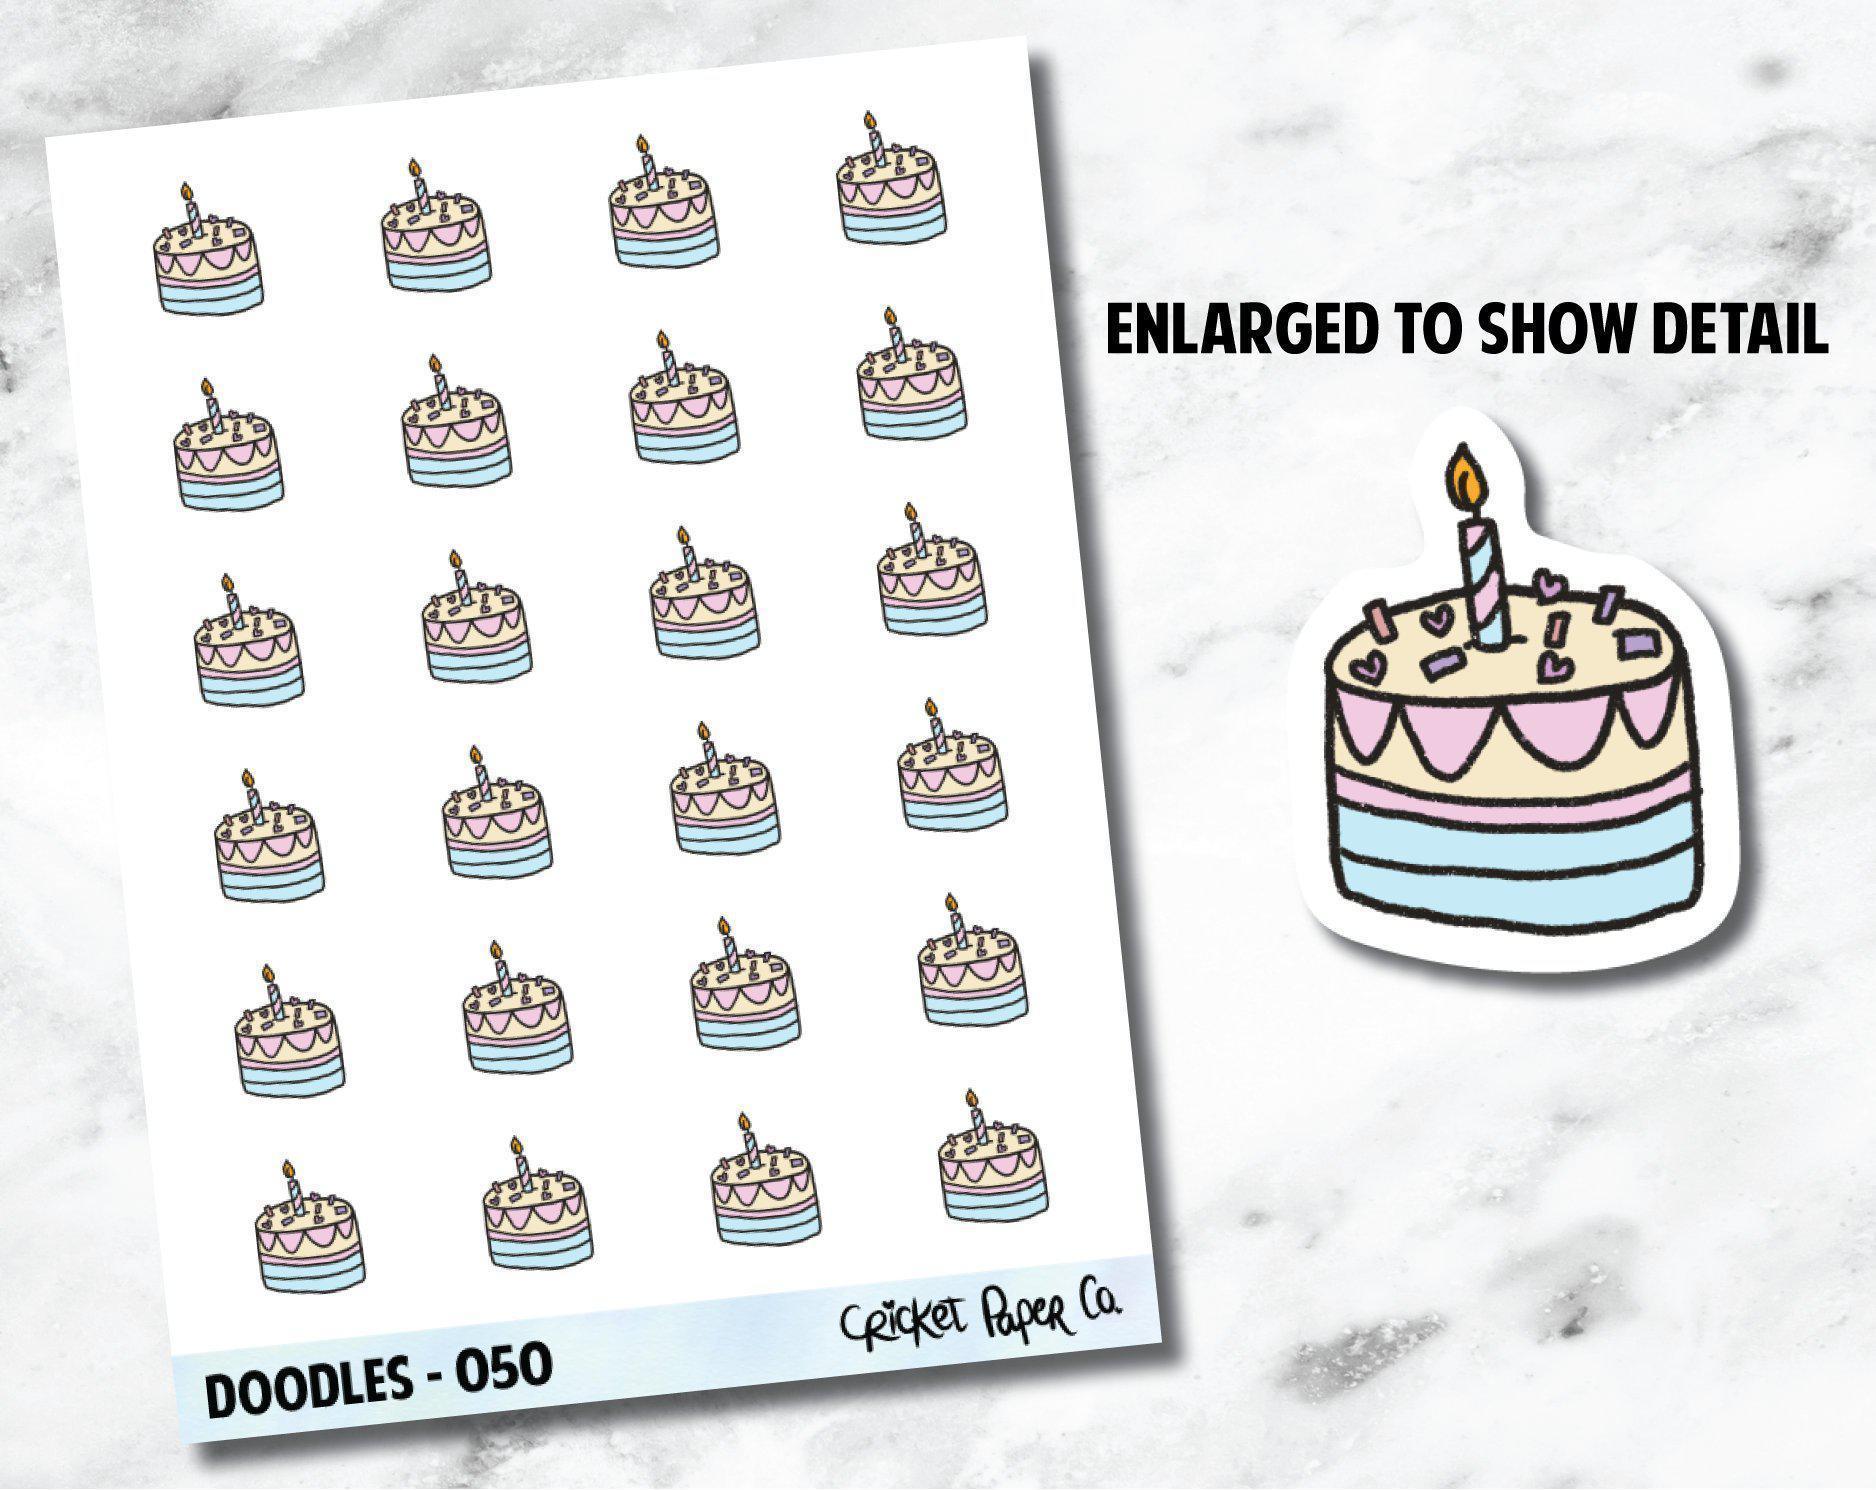 Birthday Cake, Celebration, Party Hand Drawn Doodles - 050-Cricket Paper Co.